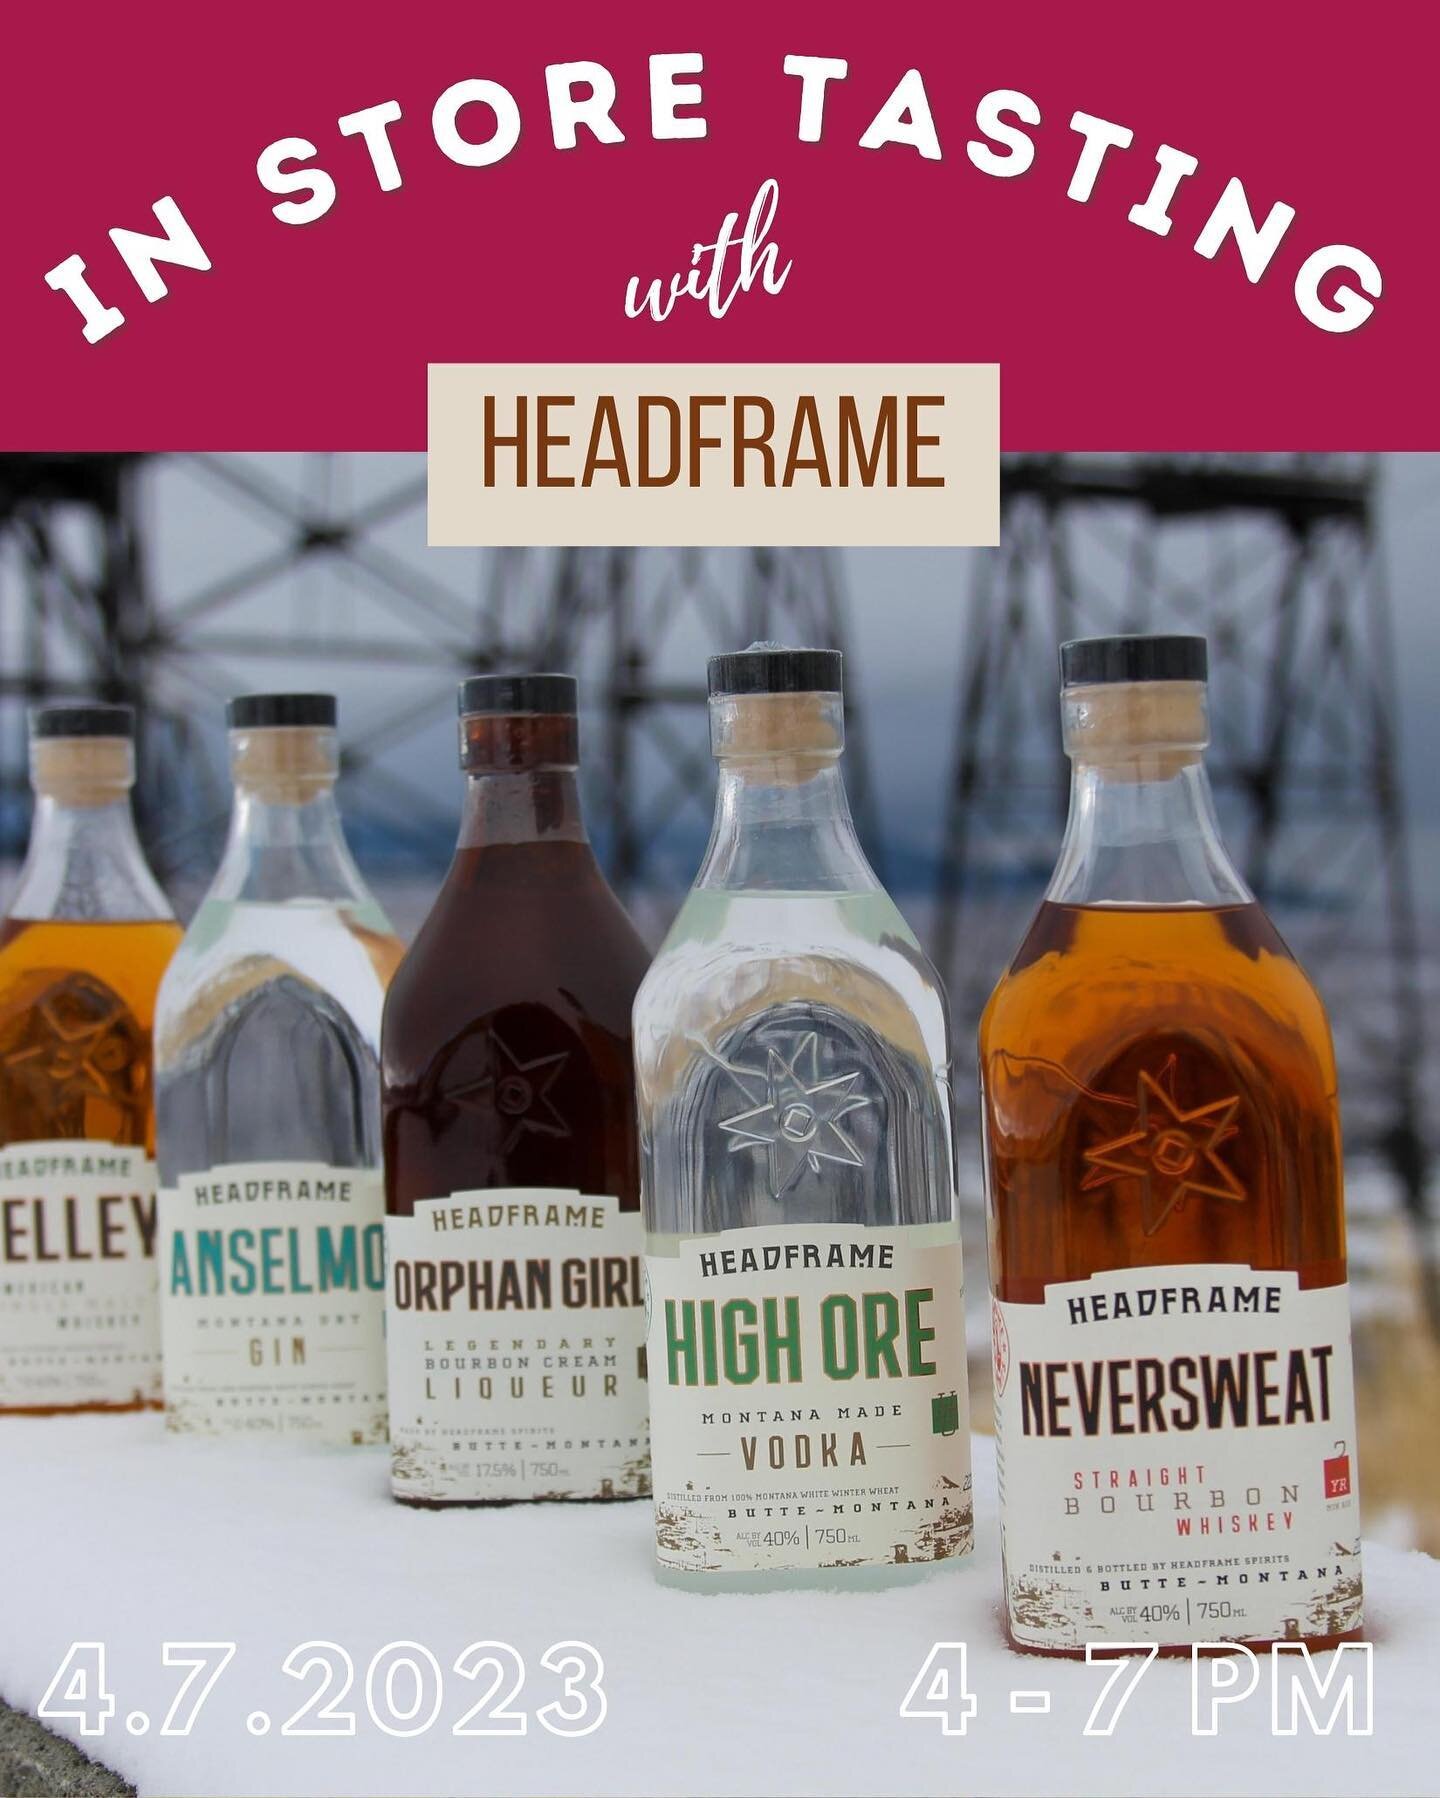 Stop in tomorrow, Friday 4/7, between 4-7pm for a free taste of some local Montana spirits from @headframespirits out of Butte! Grab a drink in the bar or stock up for the weekend in store.